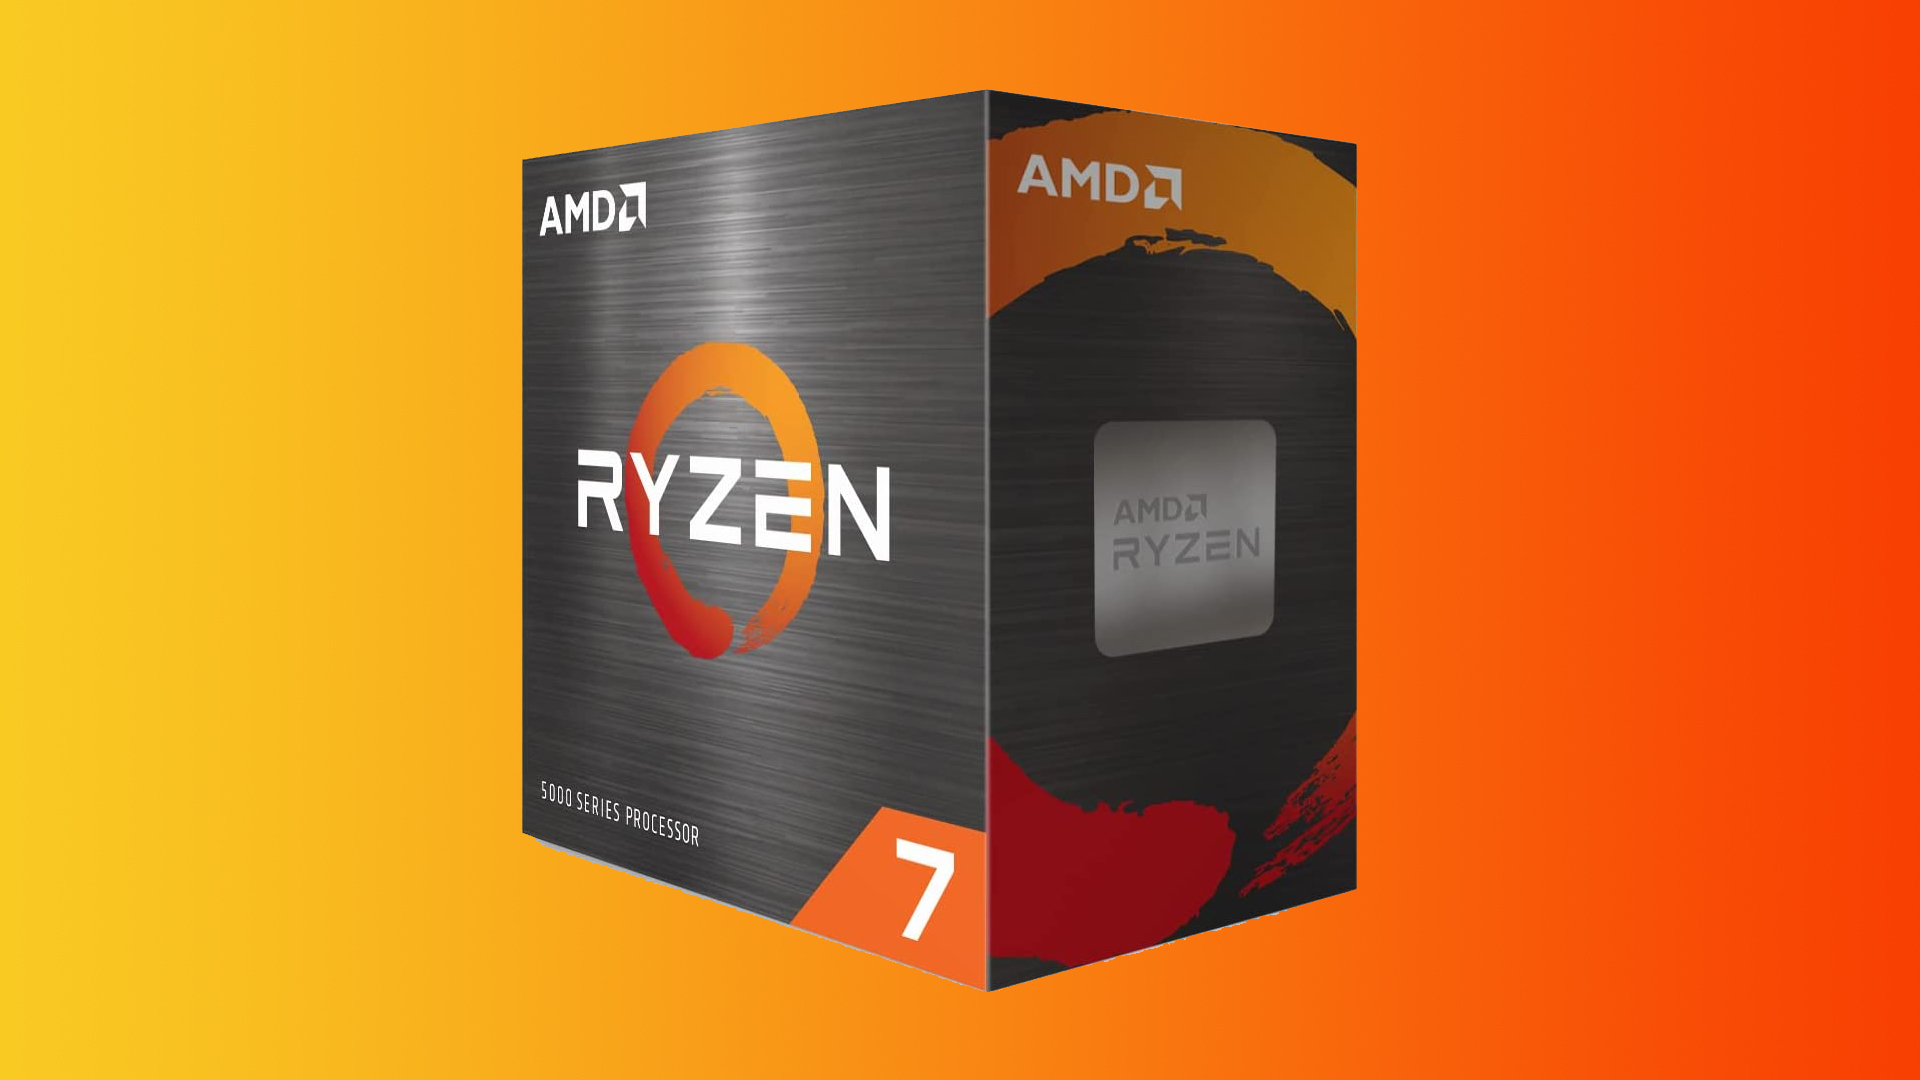 The excellent AMD Ryzen 5 5700X is just £161 from Amazon right now |  Eurogamer.net